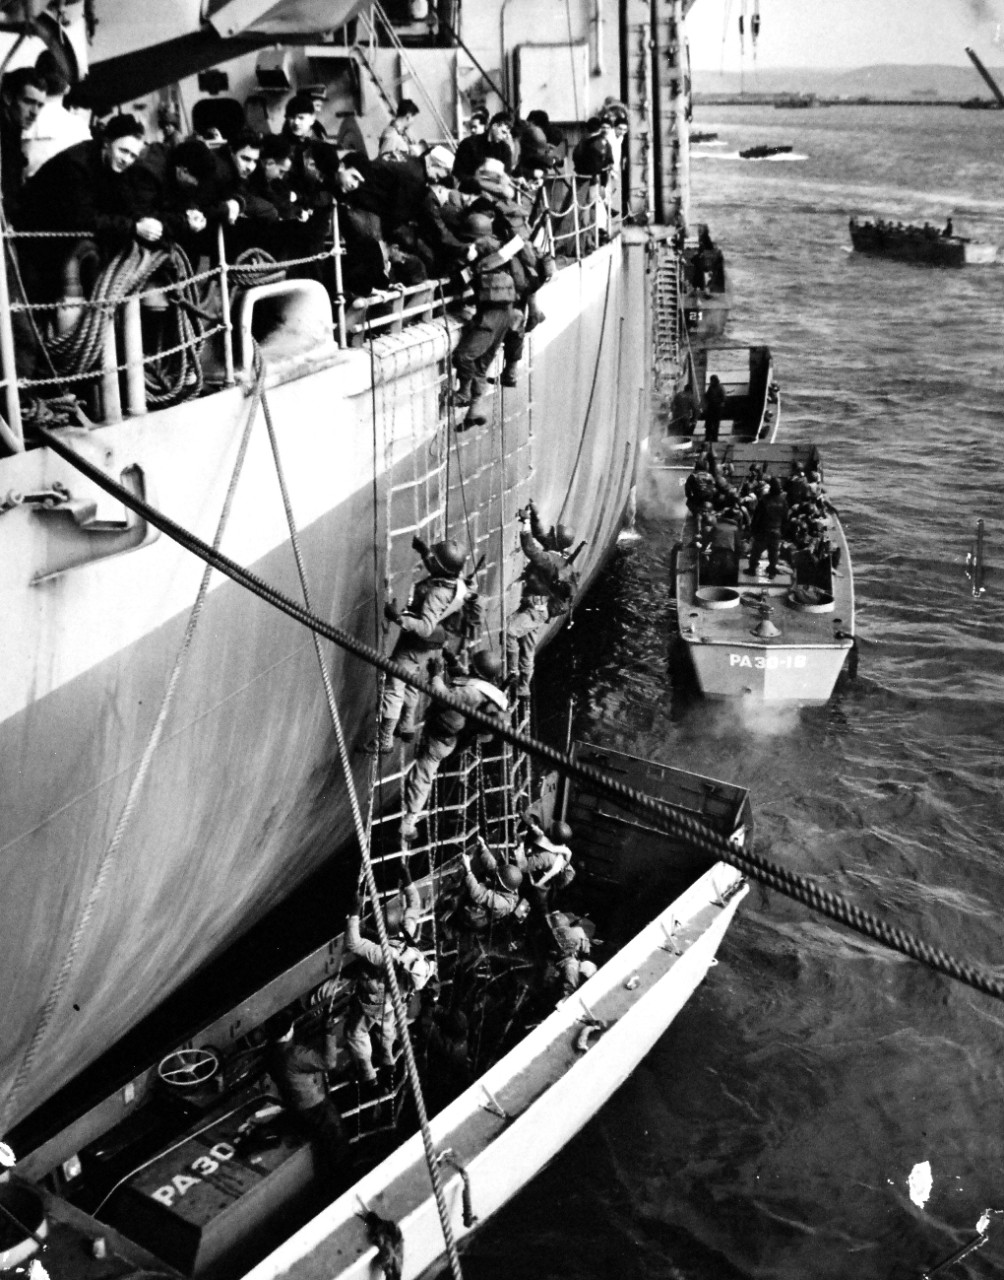 26-G-3433:  Normandy Invasion, June 1944.  Up the Landing Nets.   USS Thomas Jefferson (APA-30), at a British port and “sea taxis”, landing craft, swarm alongside packed with troops.  Up the landing nets go its fighters and over the side with Coast Guardsmen giving the boys a hand, June 1944.   Official U.S. Coast Guard Photograph, now in the collections of the National Archives.   (2015/5/19).  